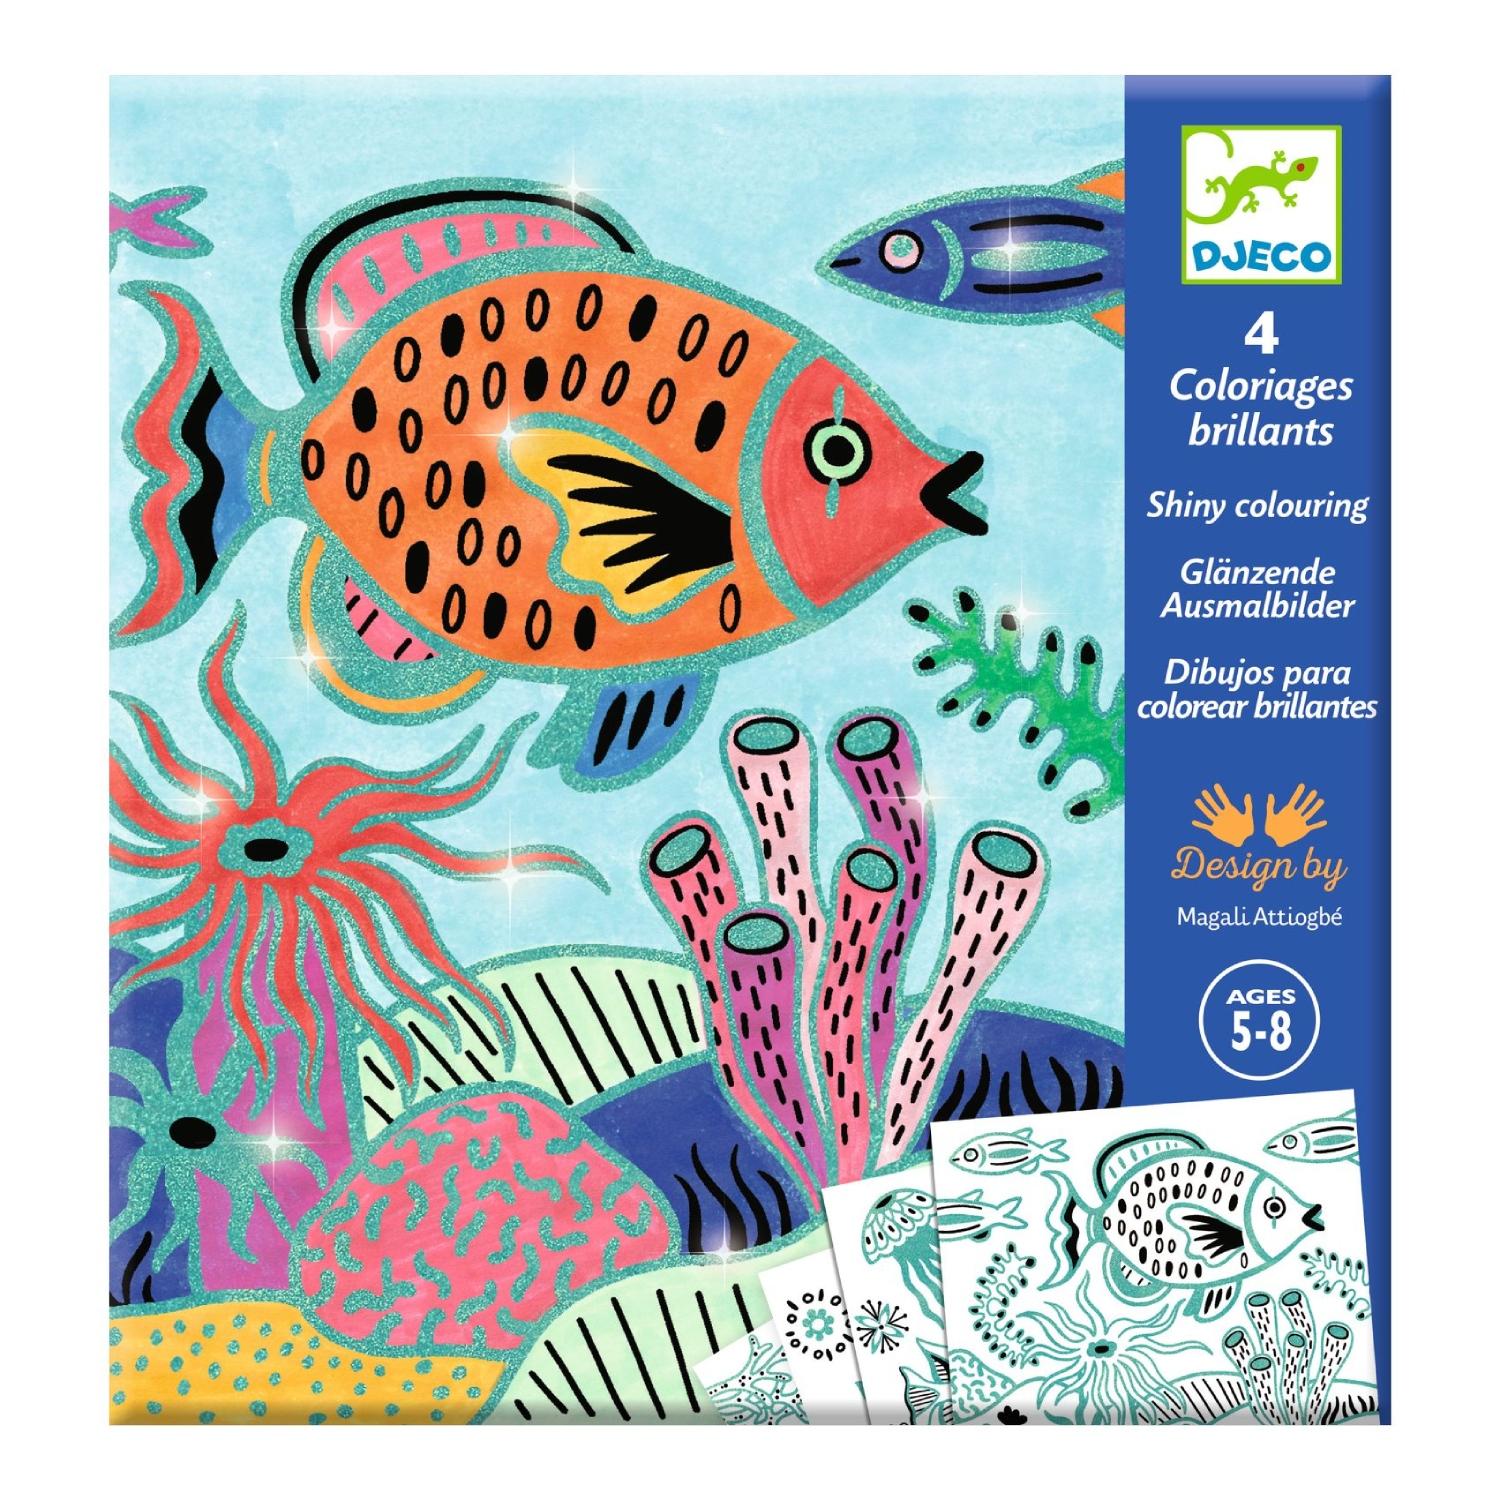 colouring surprises uner the sea by djeco